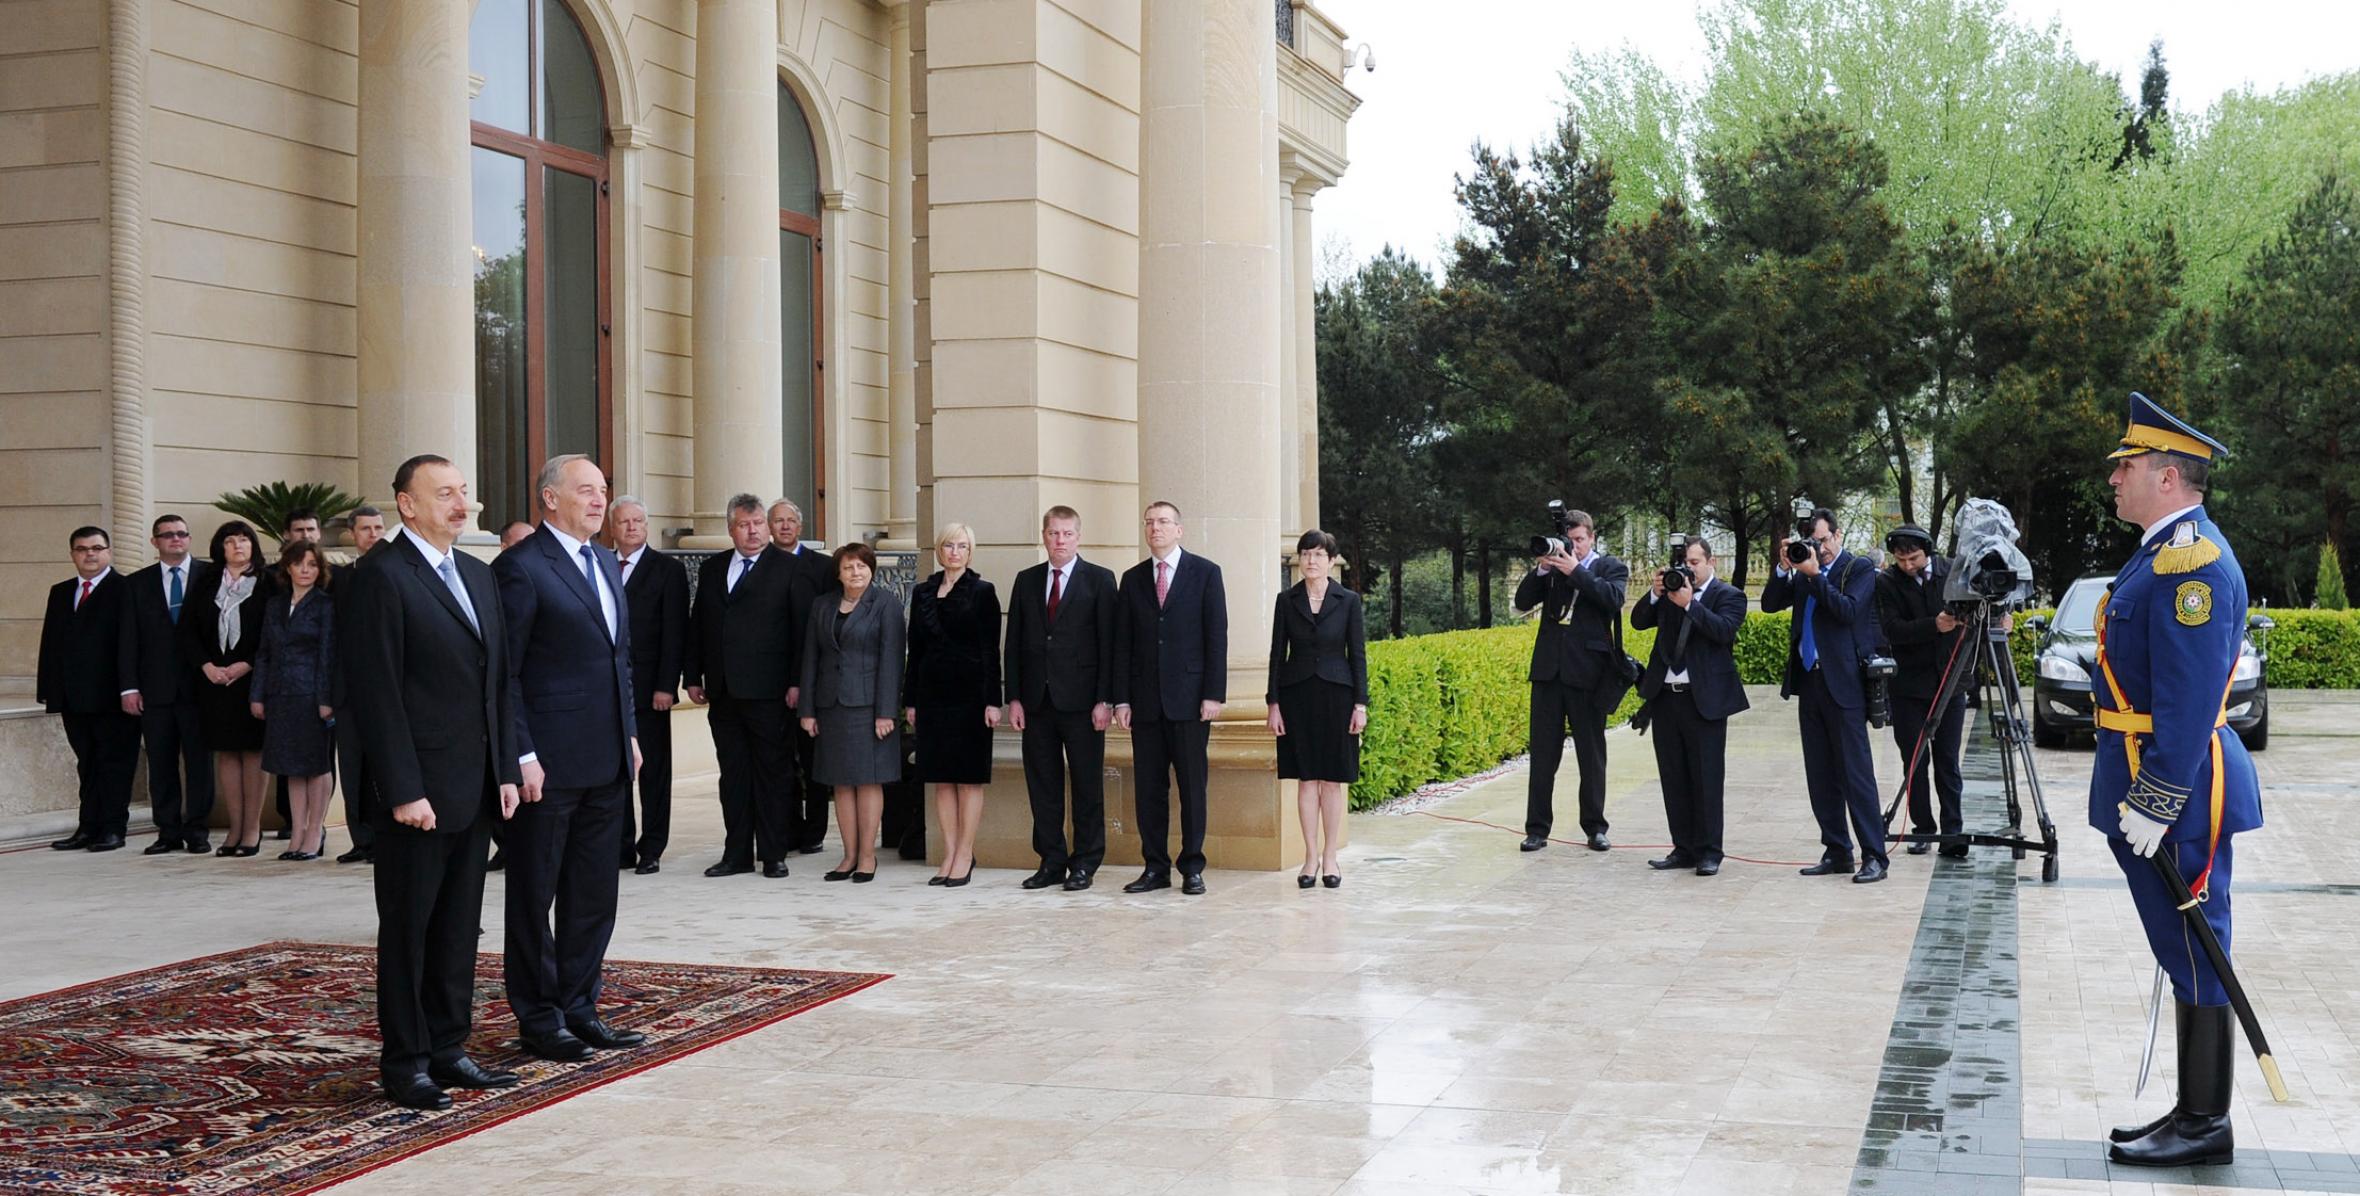 Official welcoming ceremony for President of the Republic of Latvia Andris Berzins was held